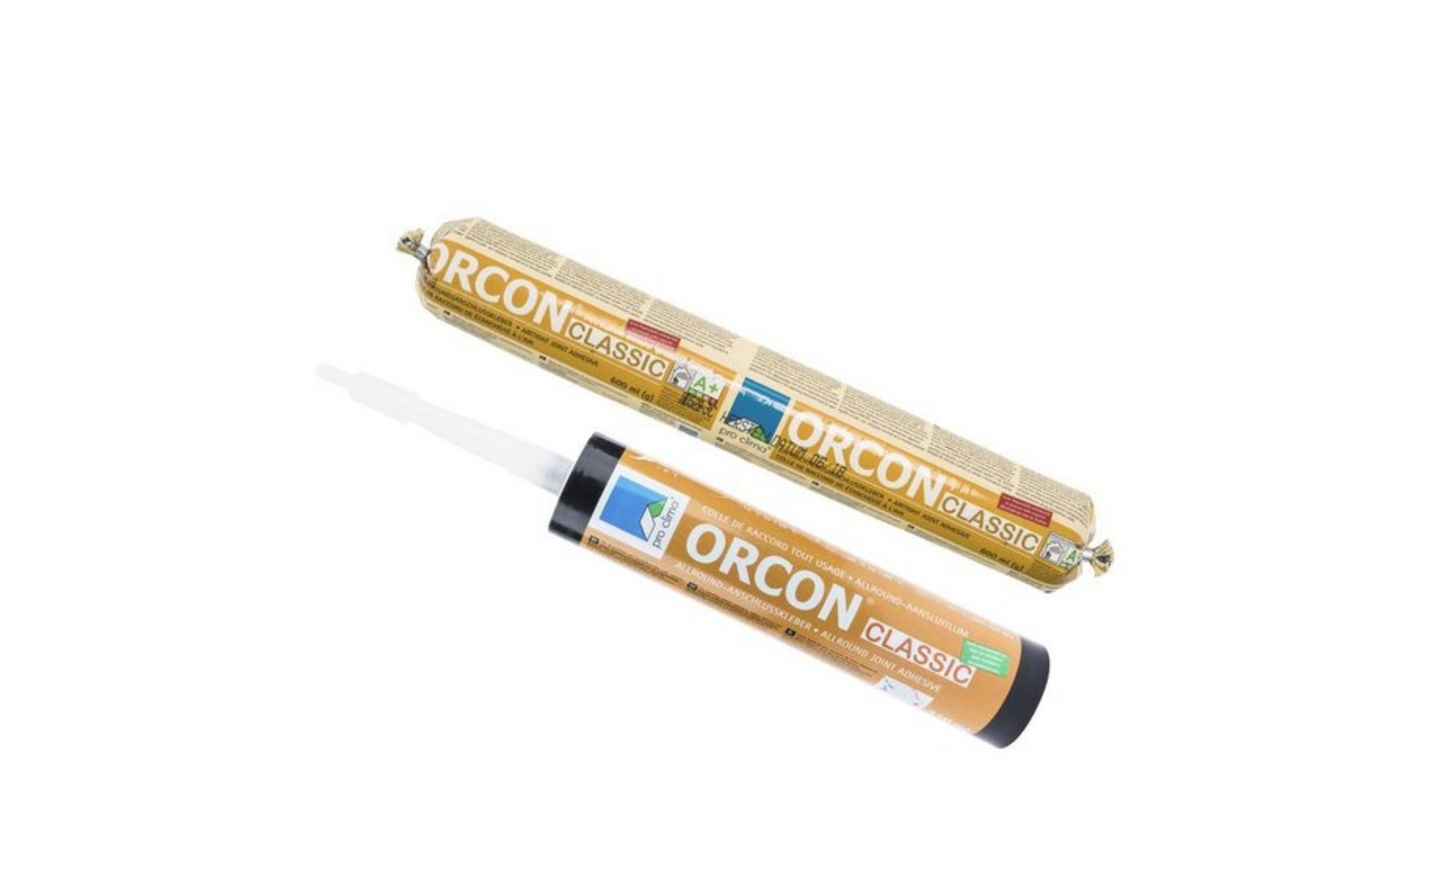 Pro Clima Orcon Classic kit